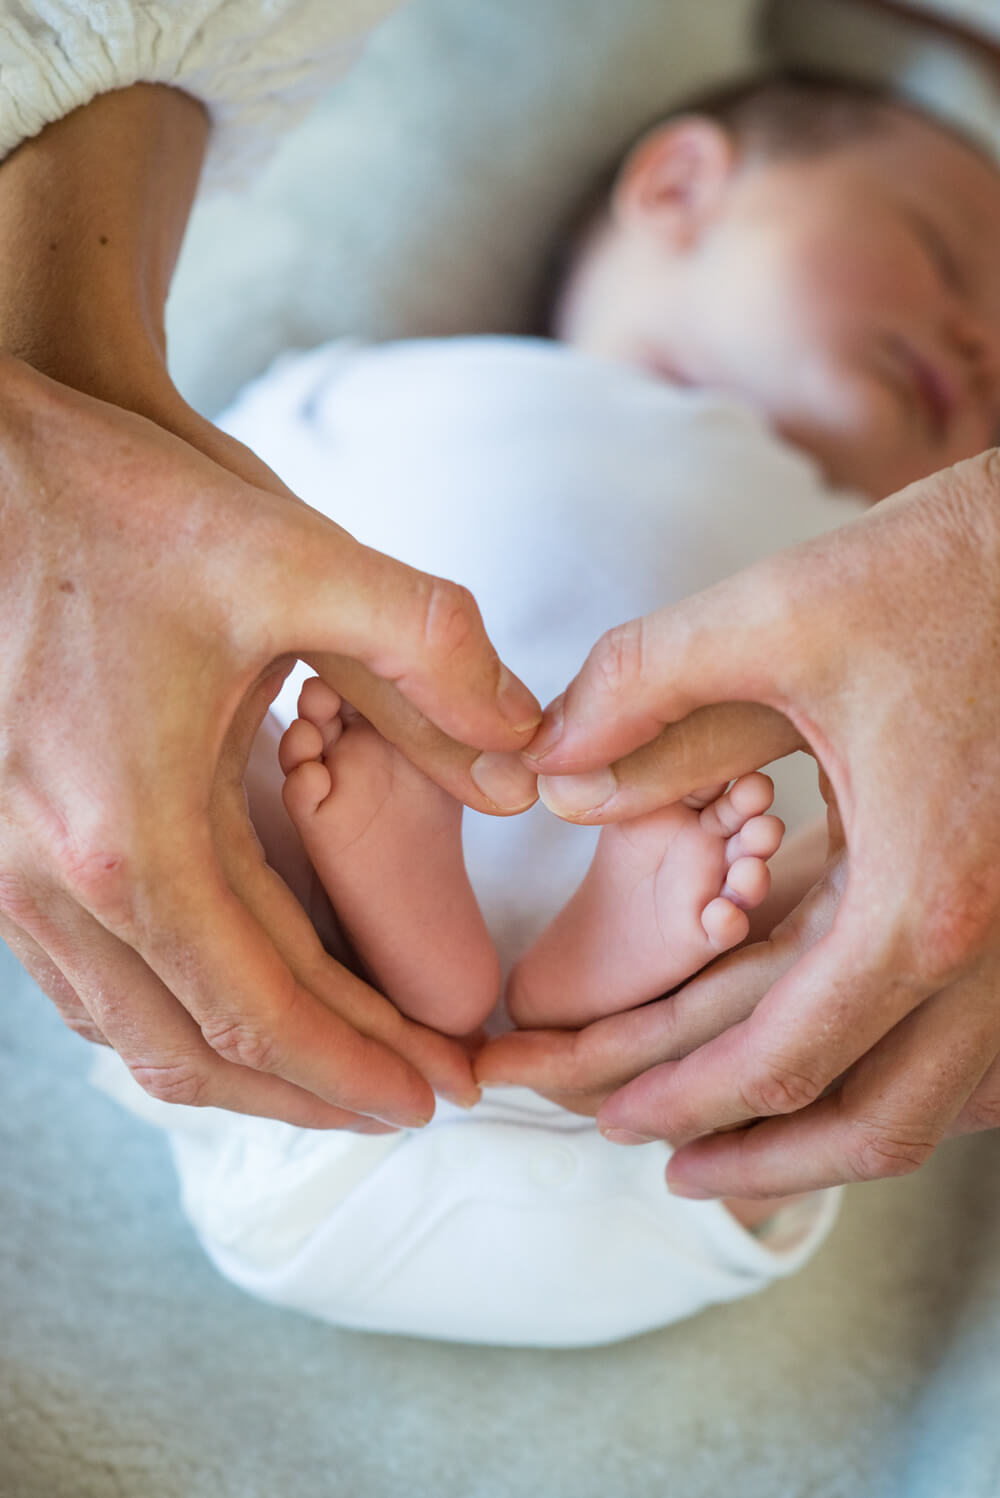 the hands of parents holding their newborn babies feet in the shape of a heart